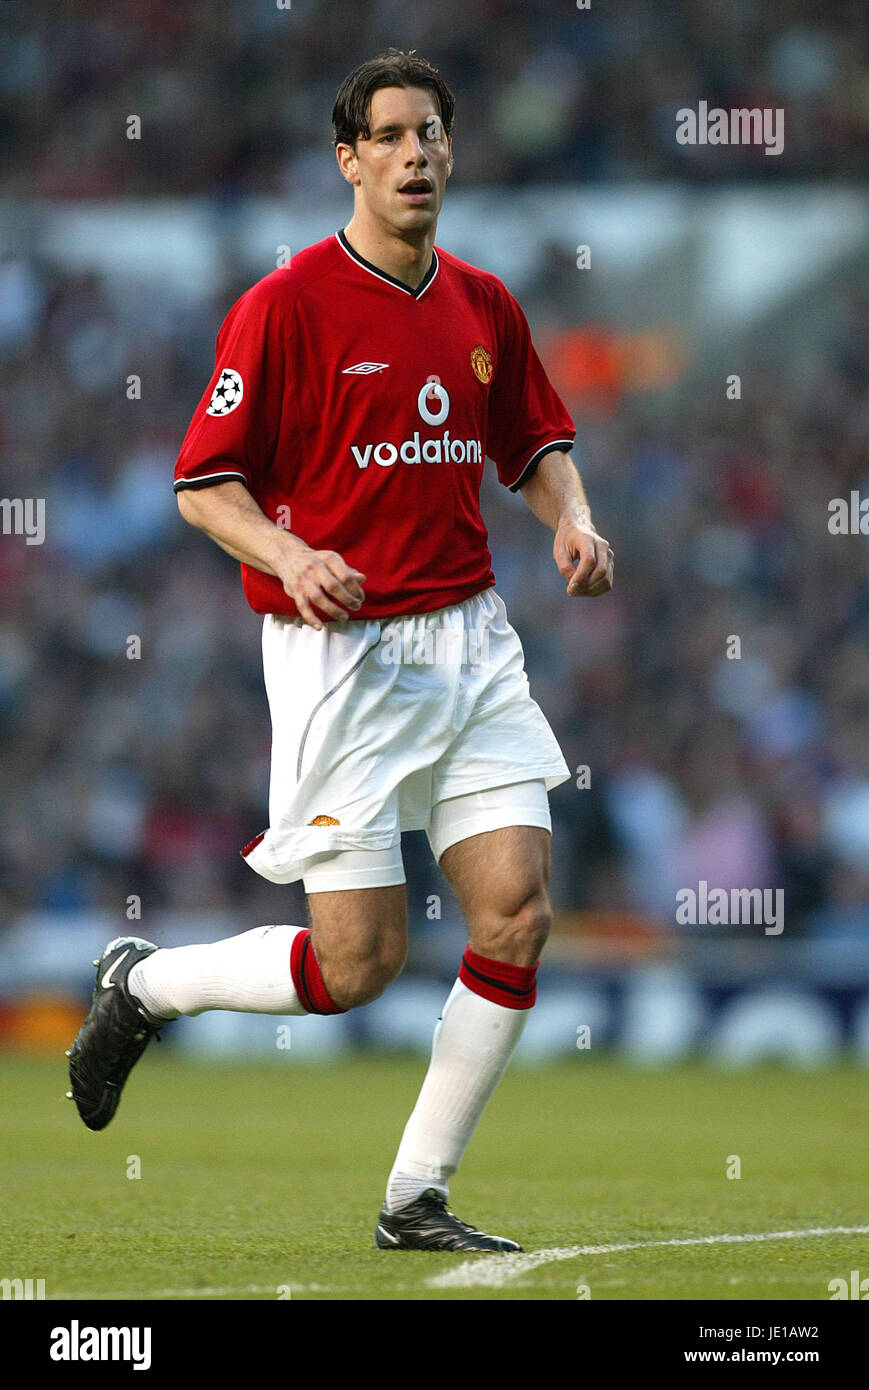 RUUD VAN NISTELROOY MANCHESTER UNITED FC OLD TRAFFORD MANCHESTER 24 April 2002 Stock Photo